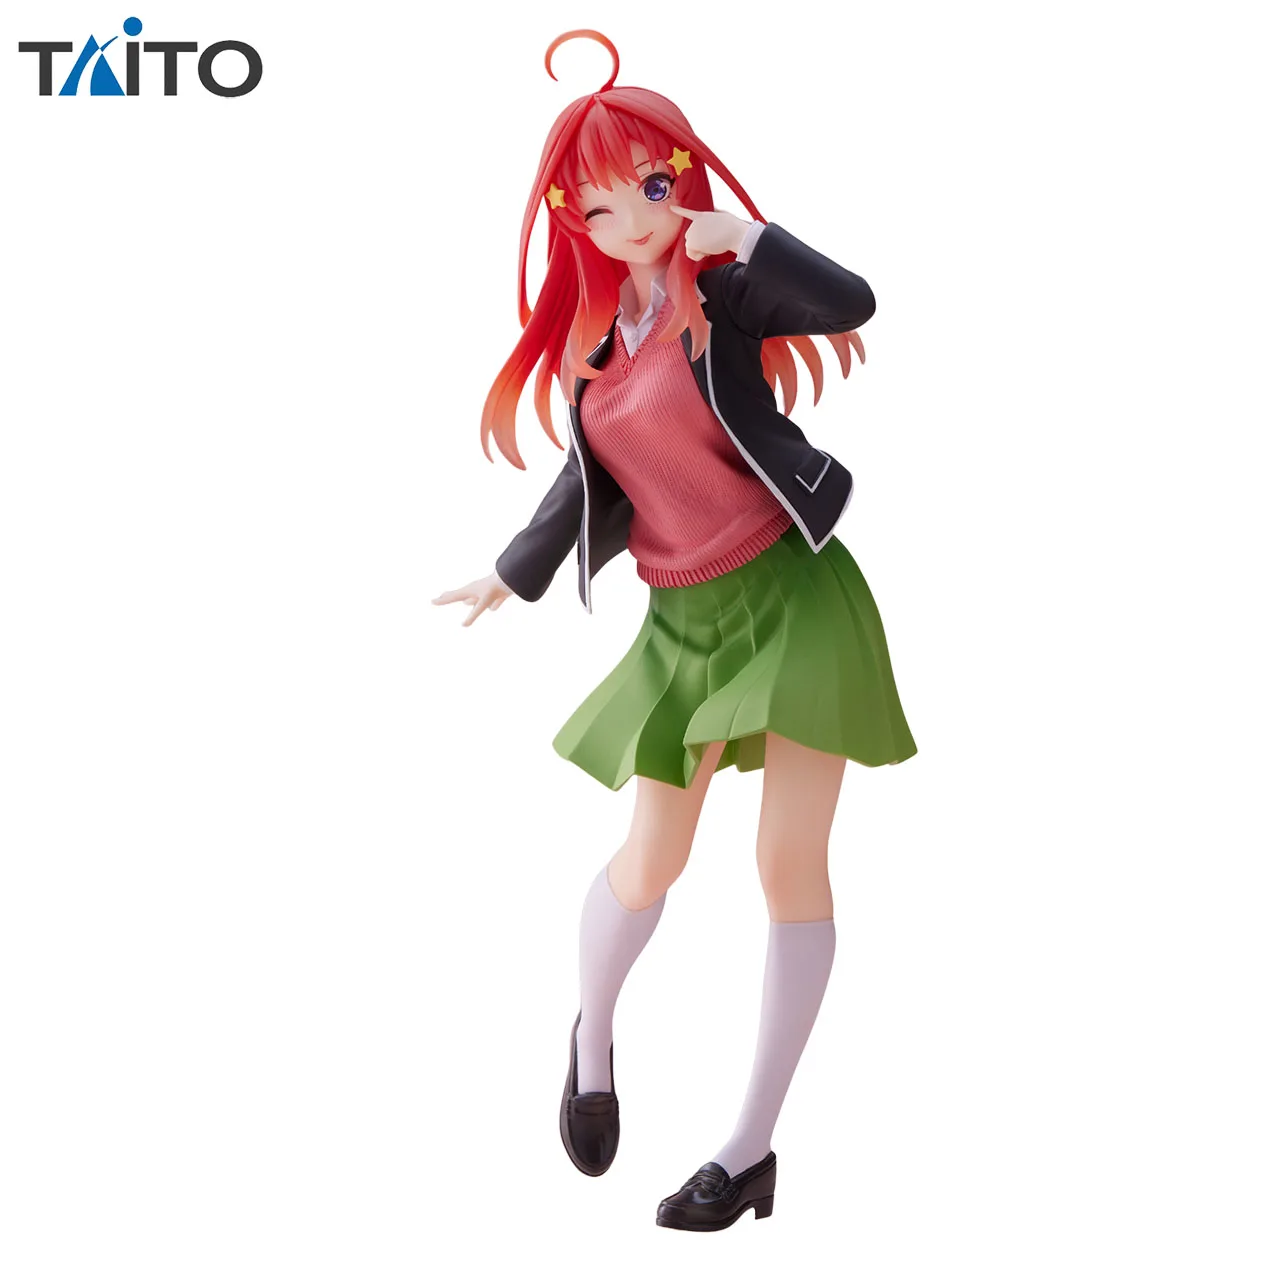 

In Stock Taito The Quintessential Quintuplets Nakano Itsuki Genuine Anime Figure Model Doll Action Figures Collection Toys Gifts